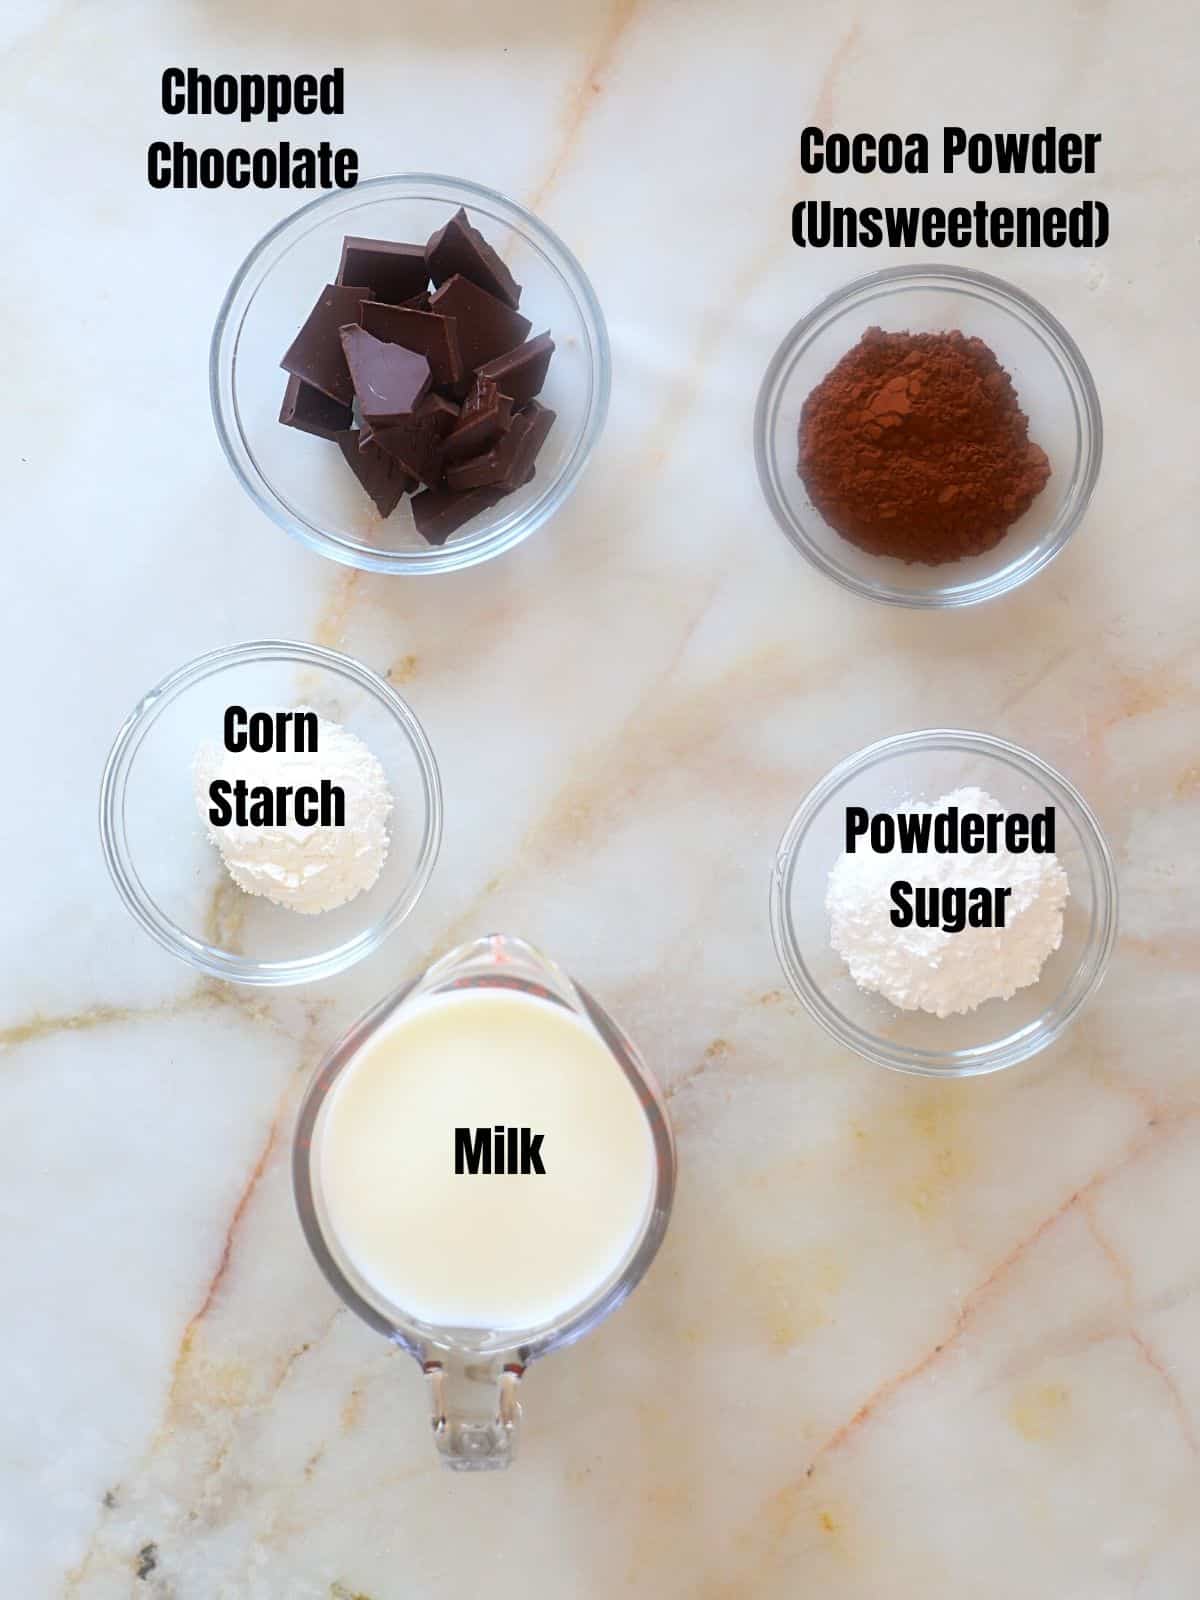 Italian hot chocolate ingredients on a marble table.